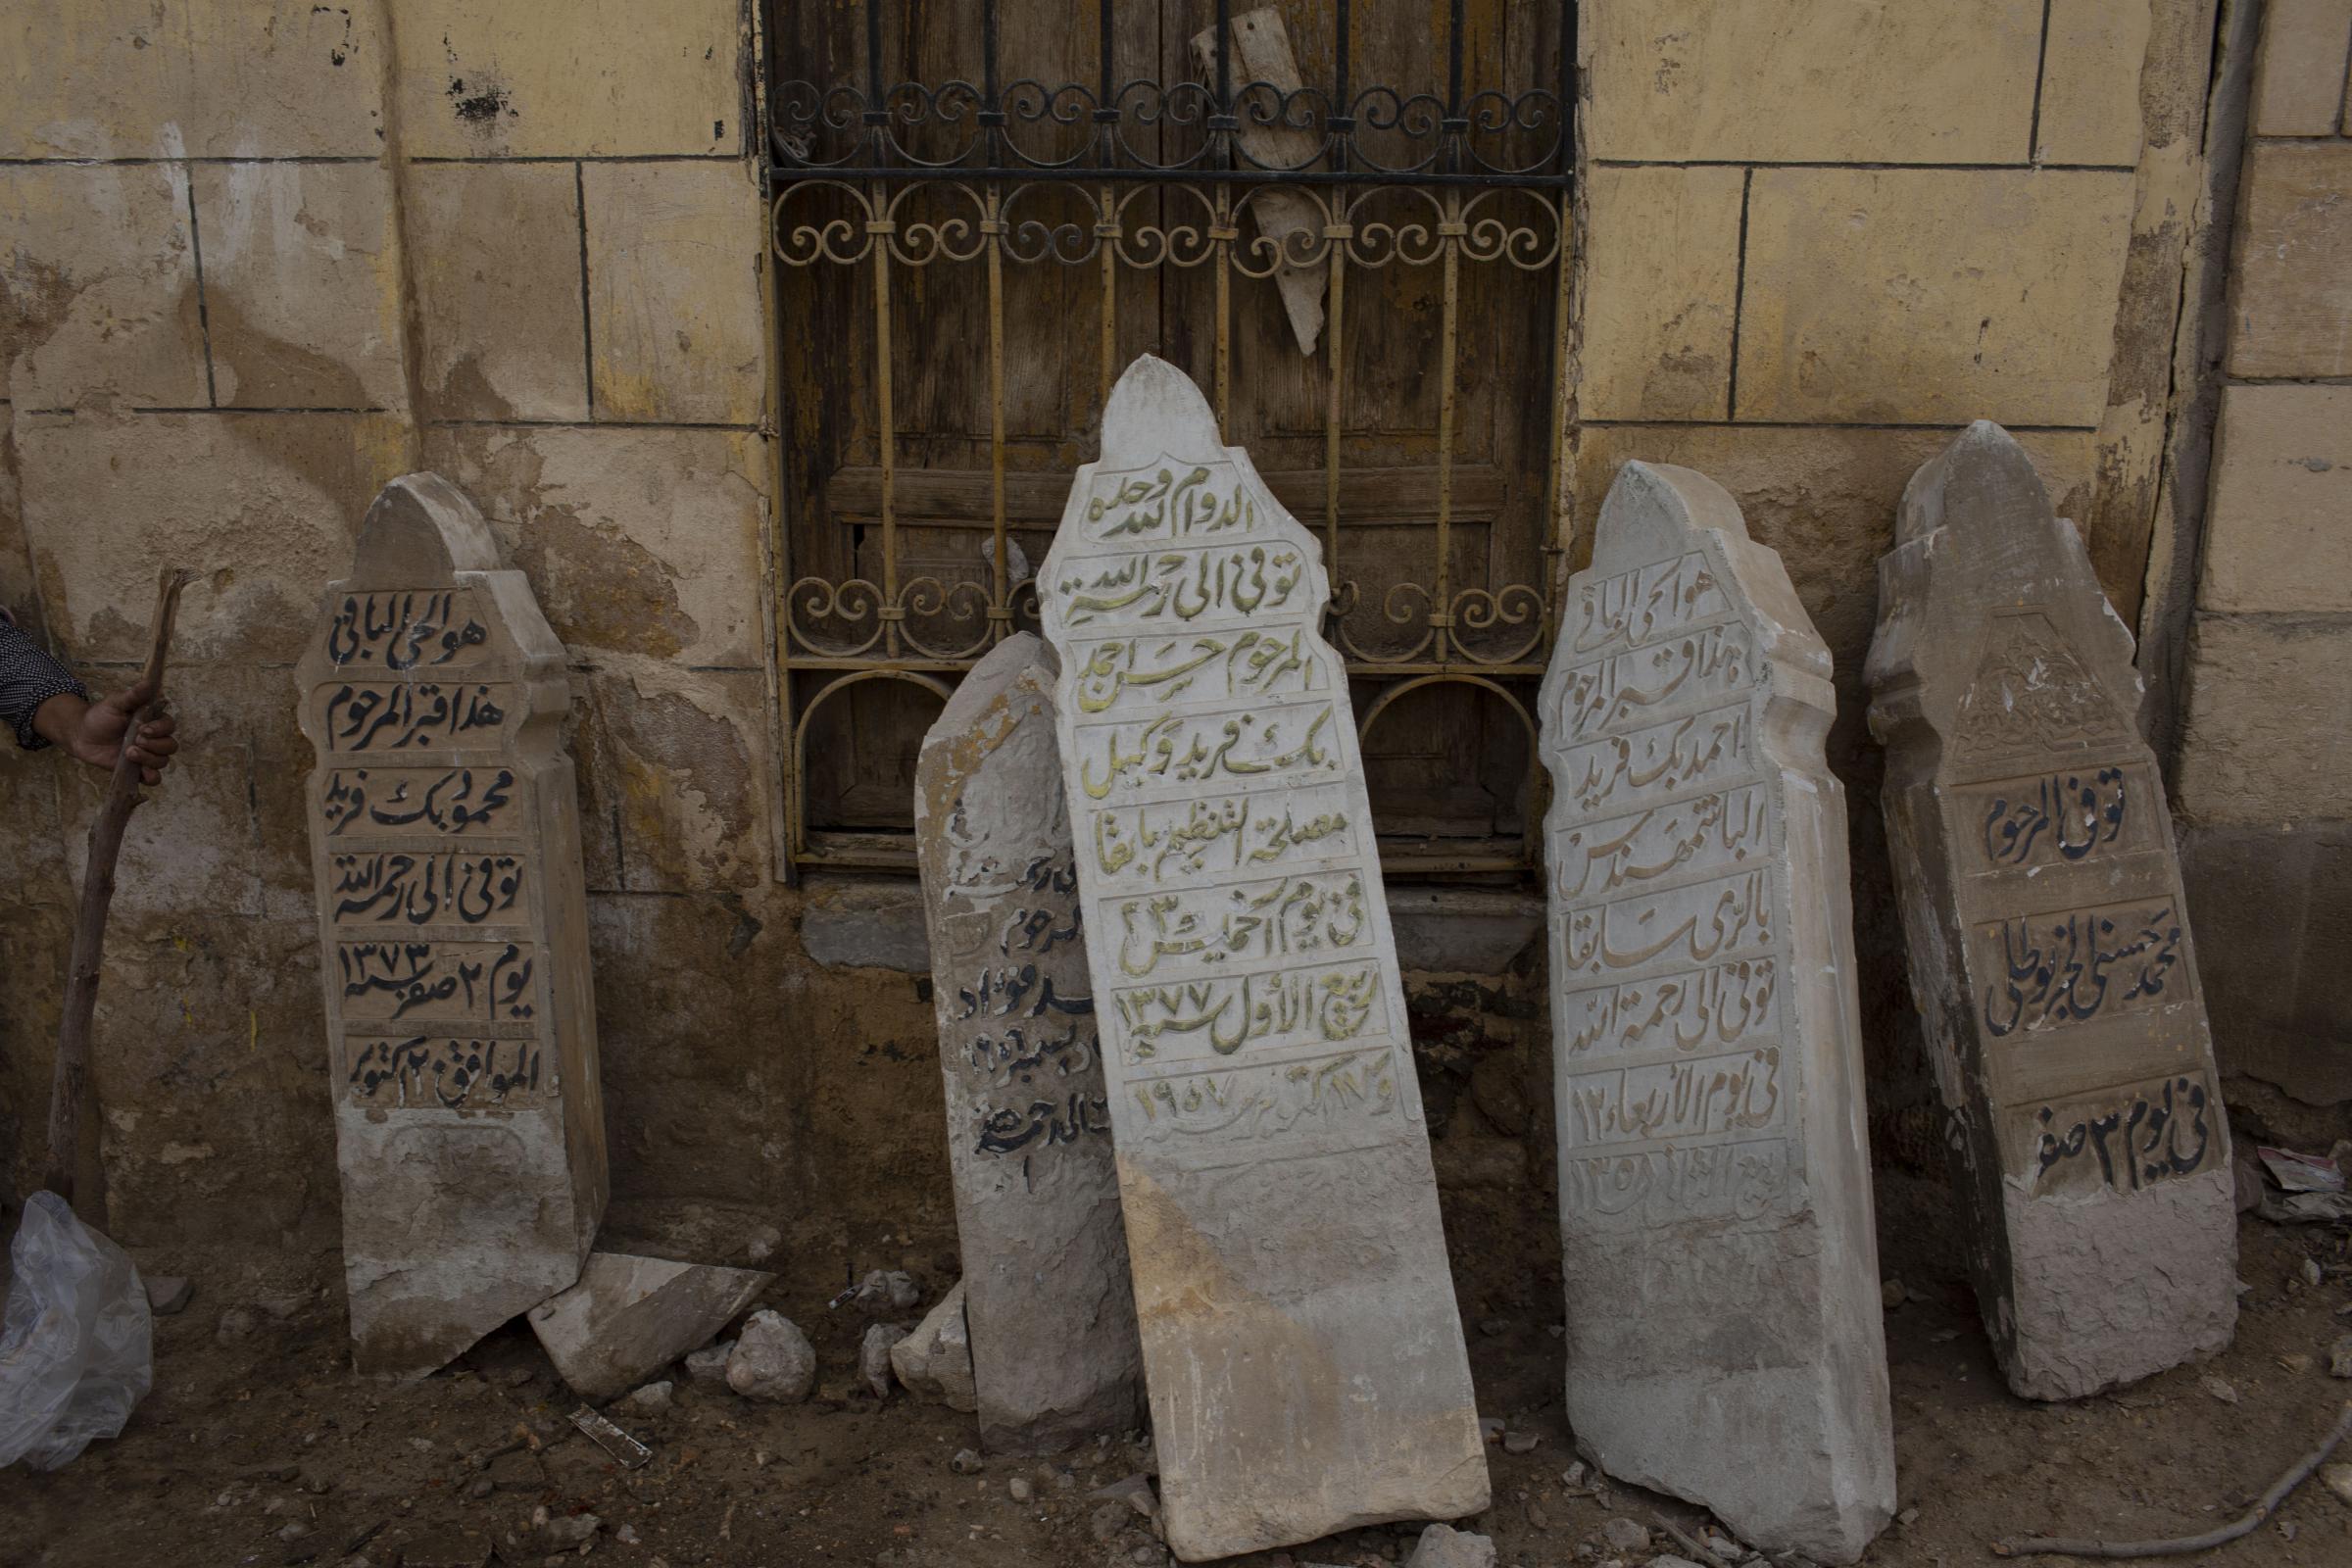 Bulldozers tear into Cairo's historic Islamic cemeteries - Tombstones are some of the remains of the demolished...